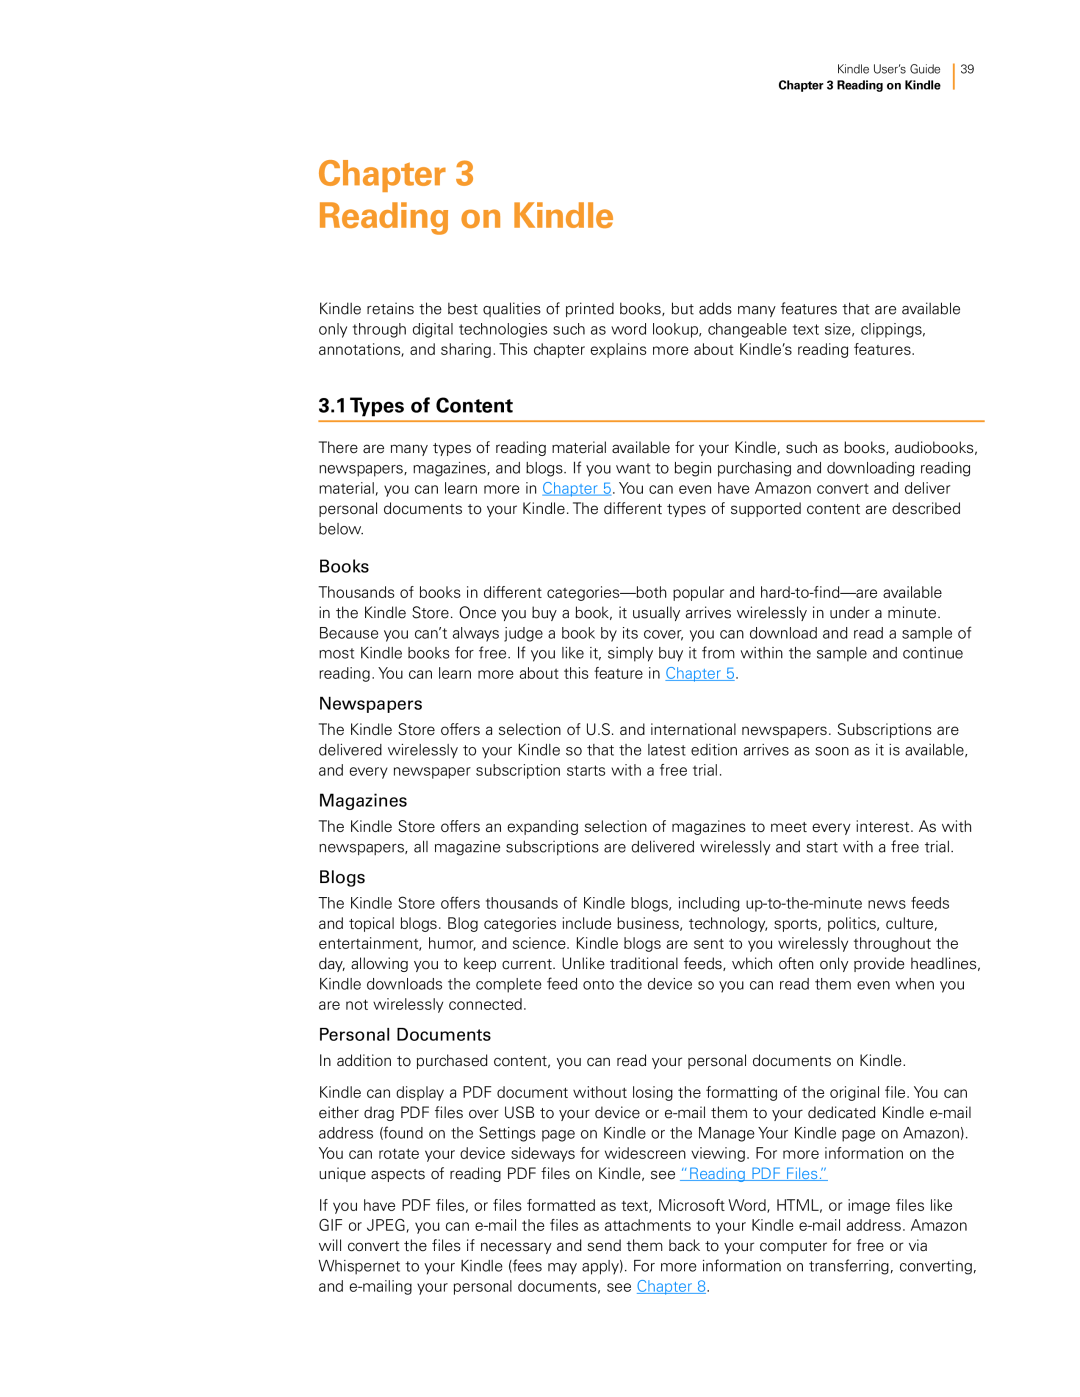 Amazon KNDKYBRD3G Chapter Reading on Kindle, Types of Content, Books, Newspapers, Magazines, Blogs, Personal Documents 